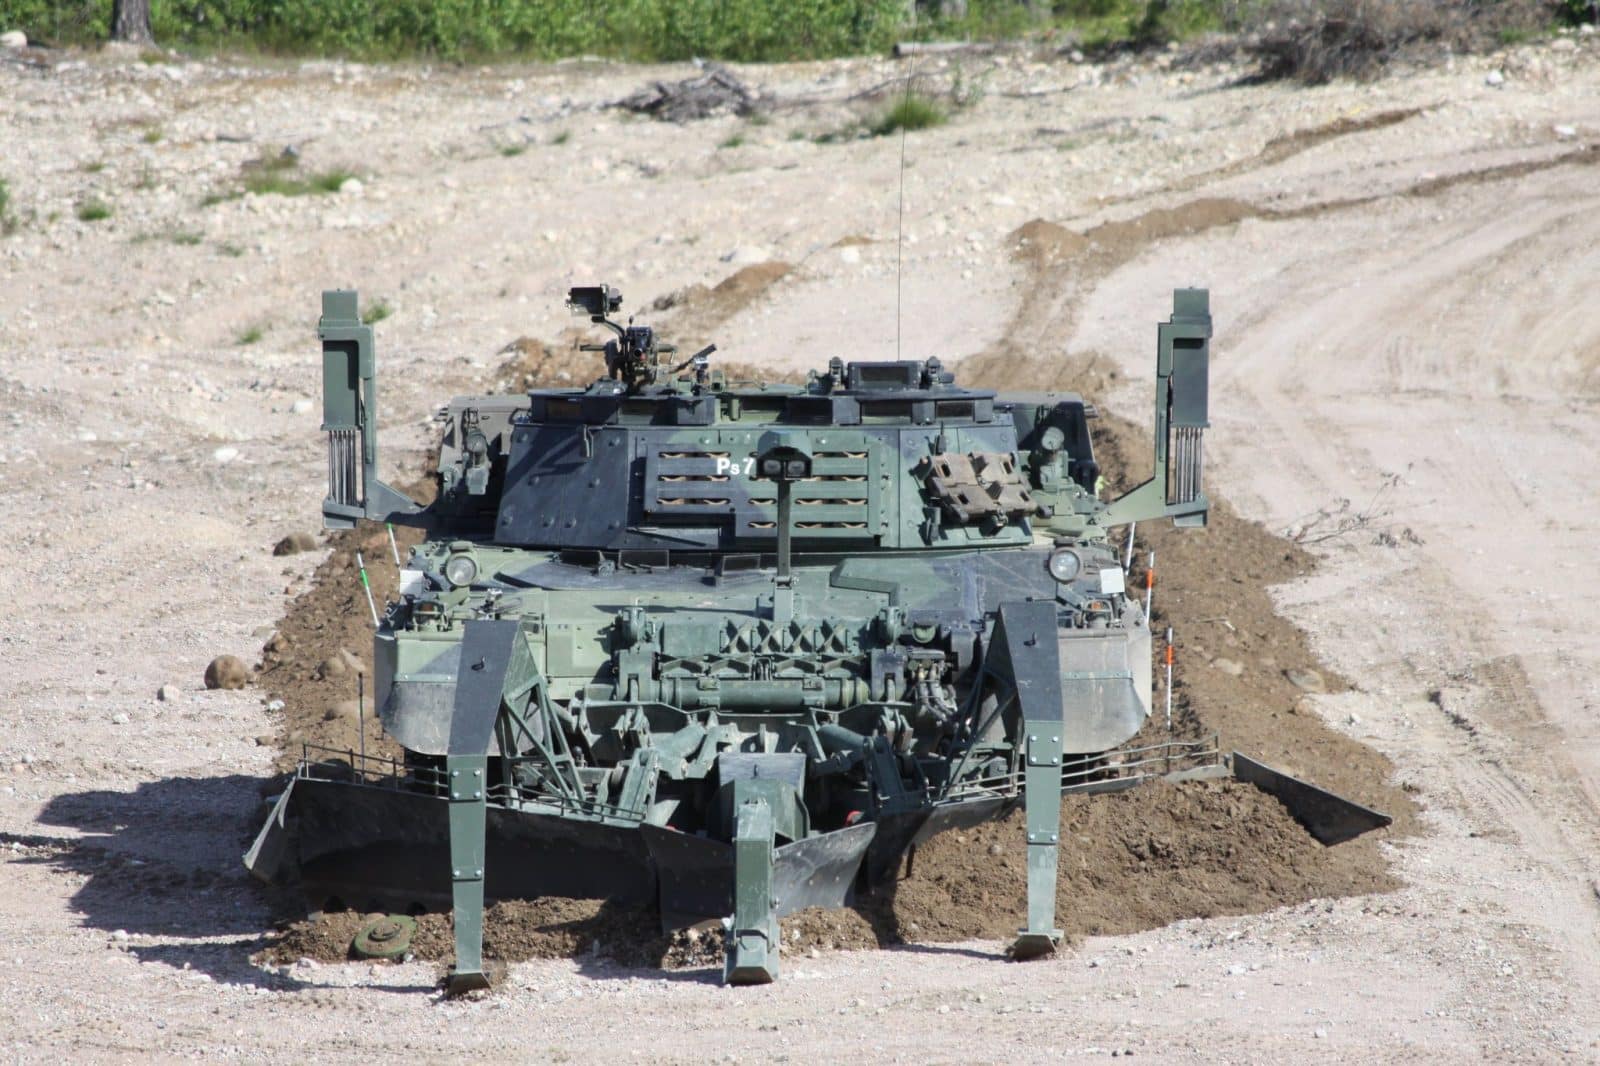 Finland will provide Ukraine with 3 Leopard 2 armored mine-clearing vehicles